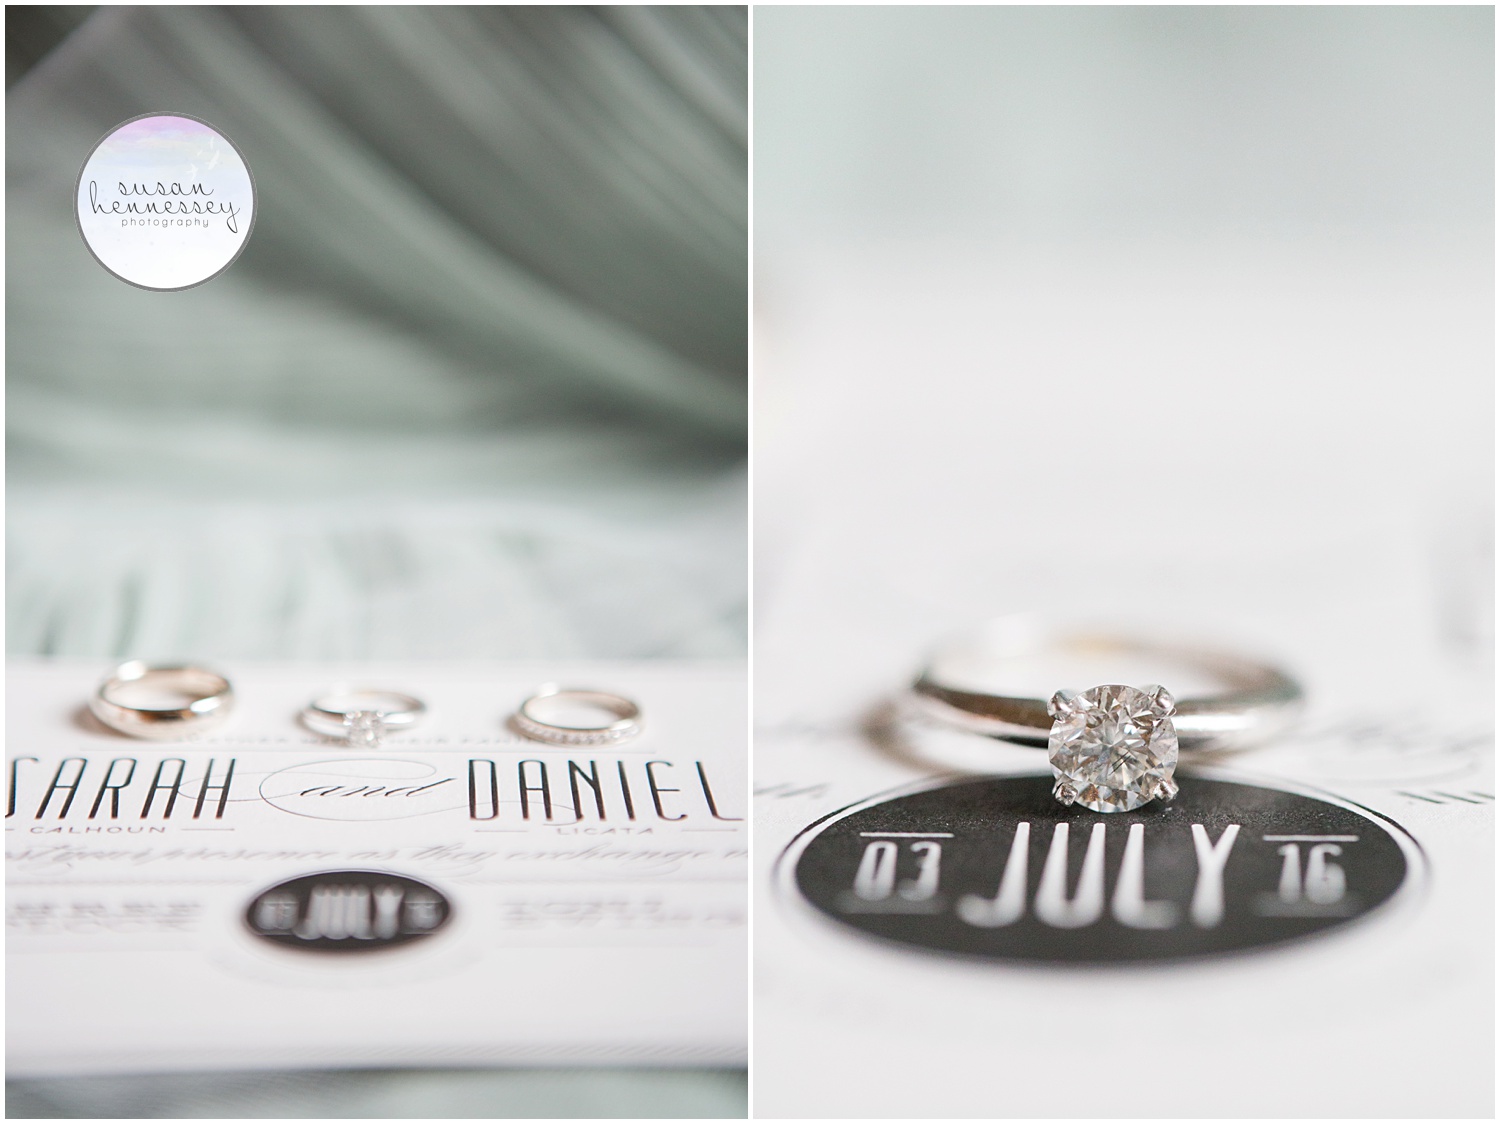 Ring details from Triumph Brewery wedding.